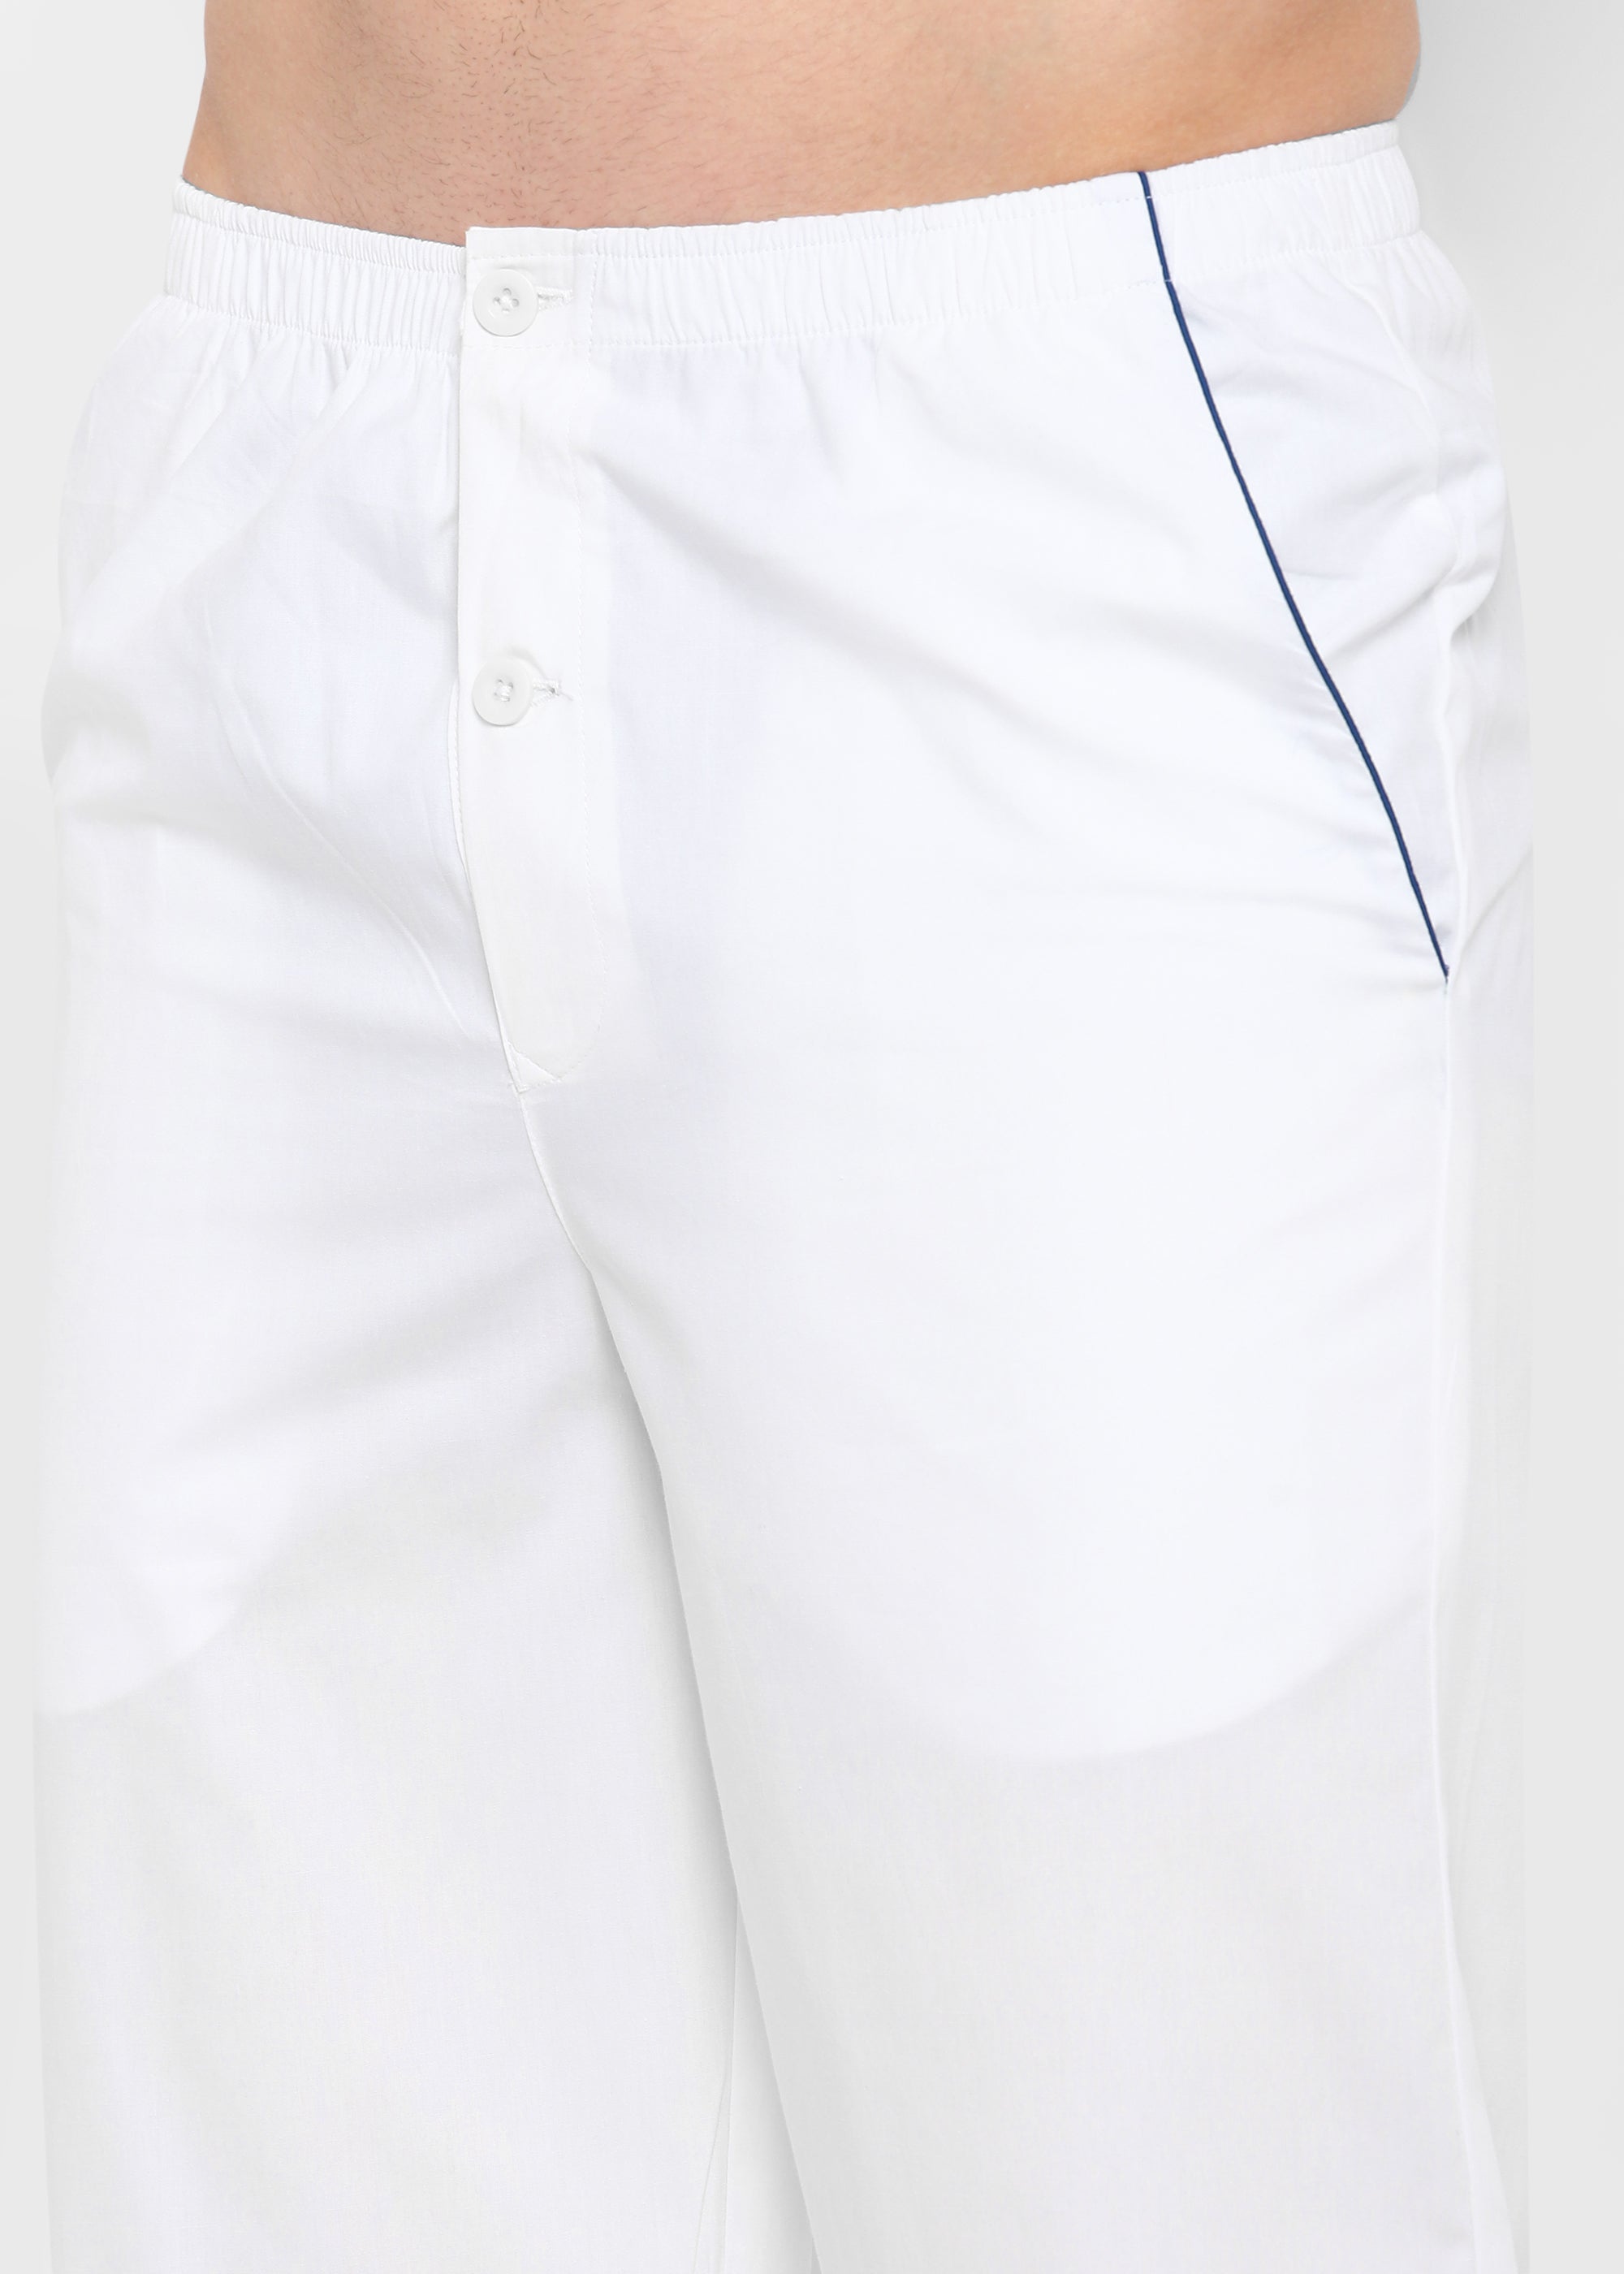 White Cotton with Blue Piping Men's Night Suit